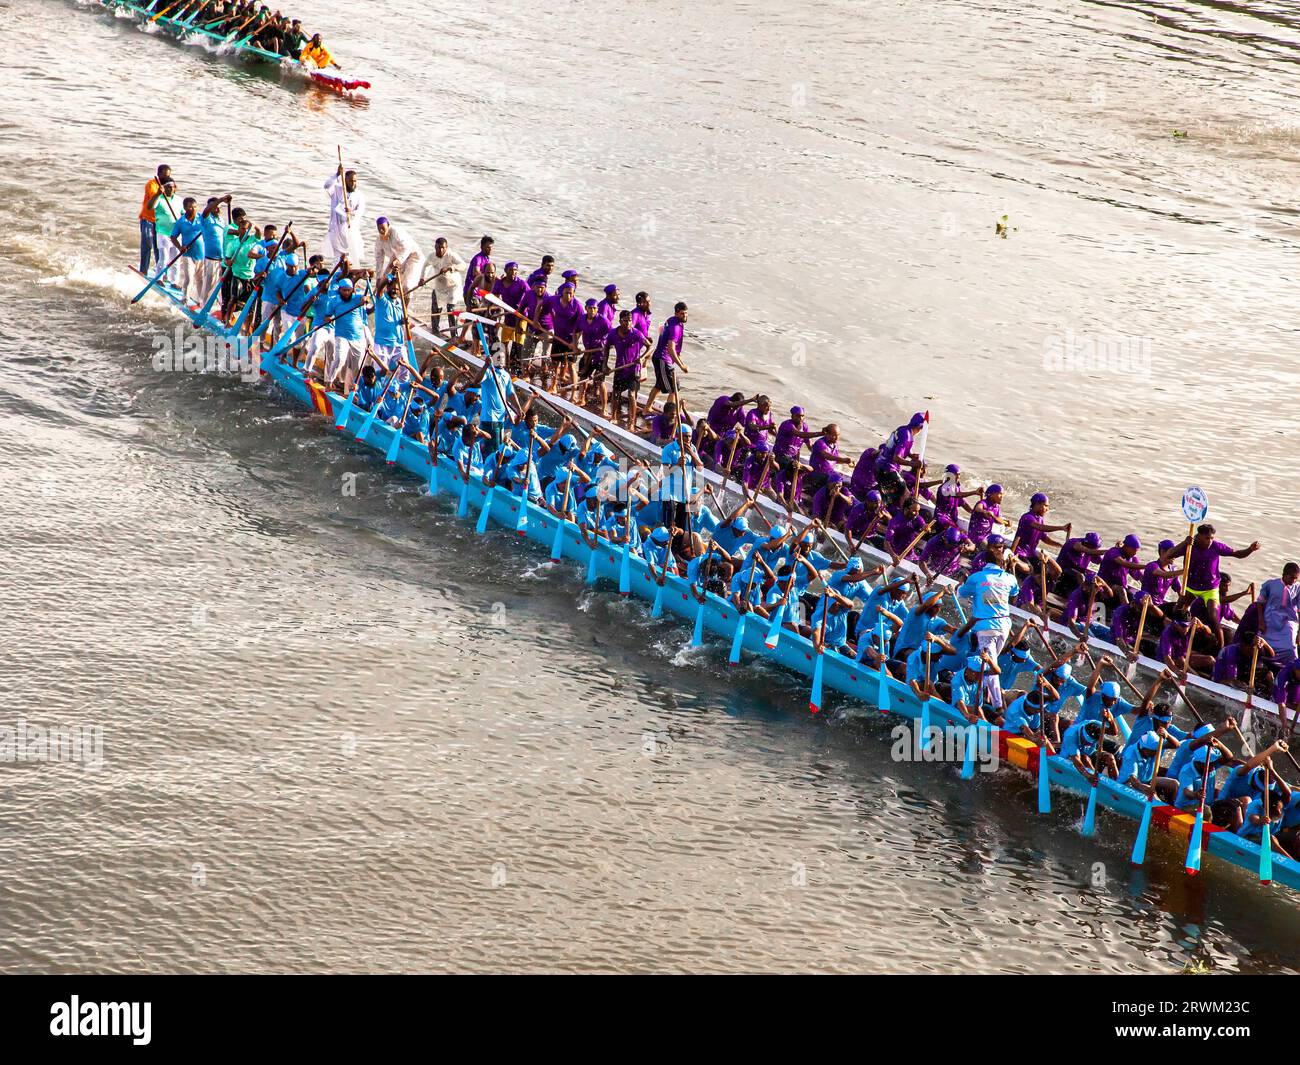 Nouka Baich is a traditional dragon boat-style paddling sport of Bangladesh. The boat race was held at the Titas River in Brahmanbaria with Thousands of people from the coastal area in attendance. A total of 14 boats from Brahmanbaria, Habiganj and Kishoreganj took part in the race. Brahmanbaria, Bangladesh. Stock Photo